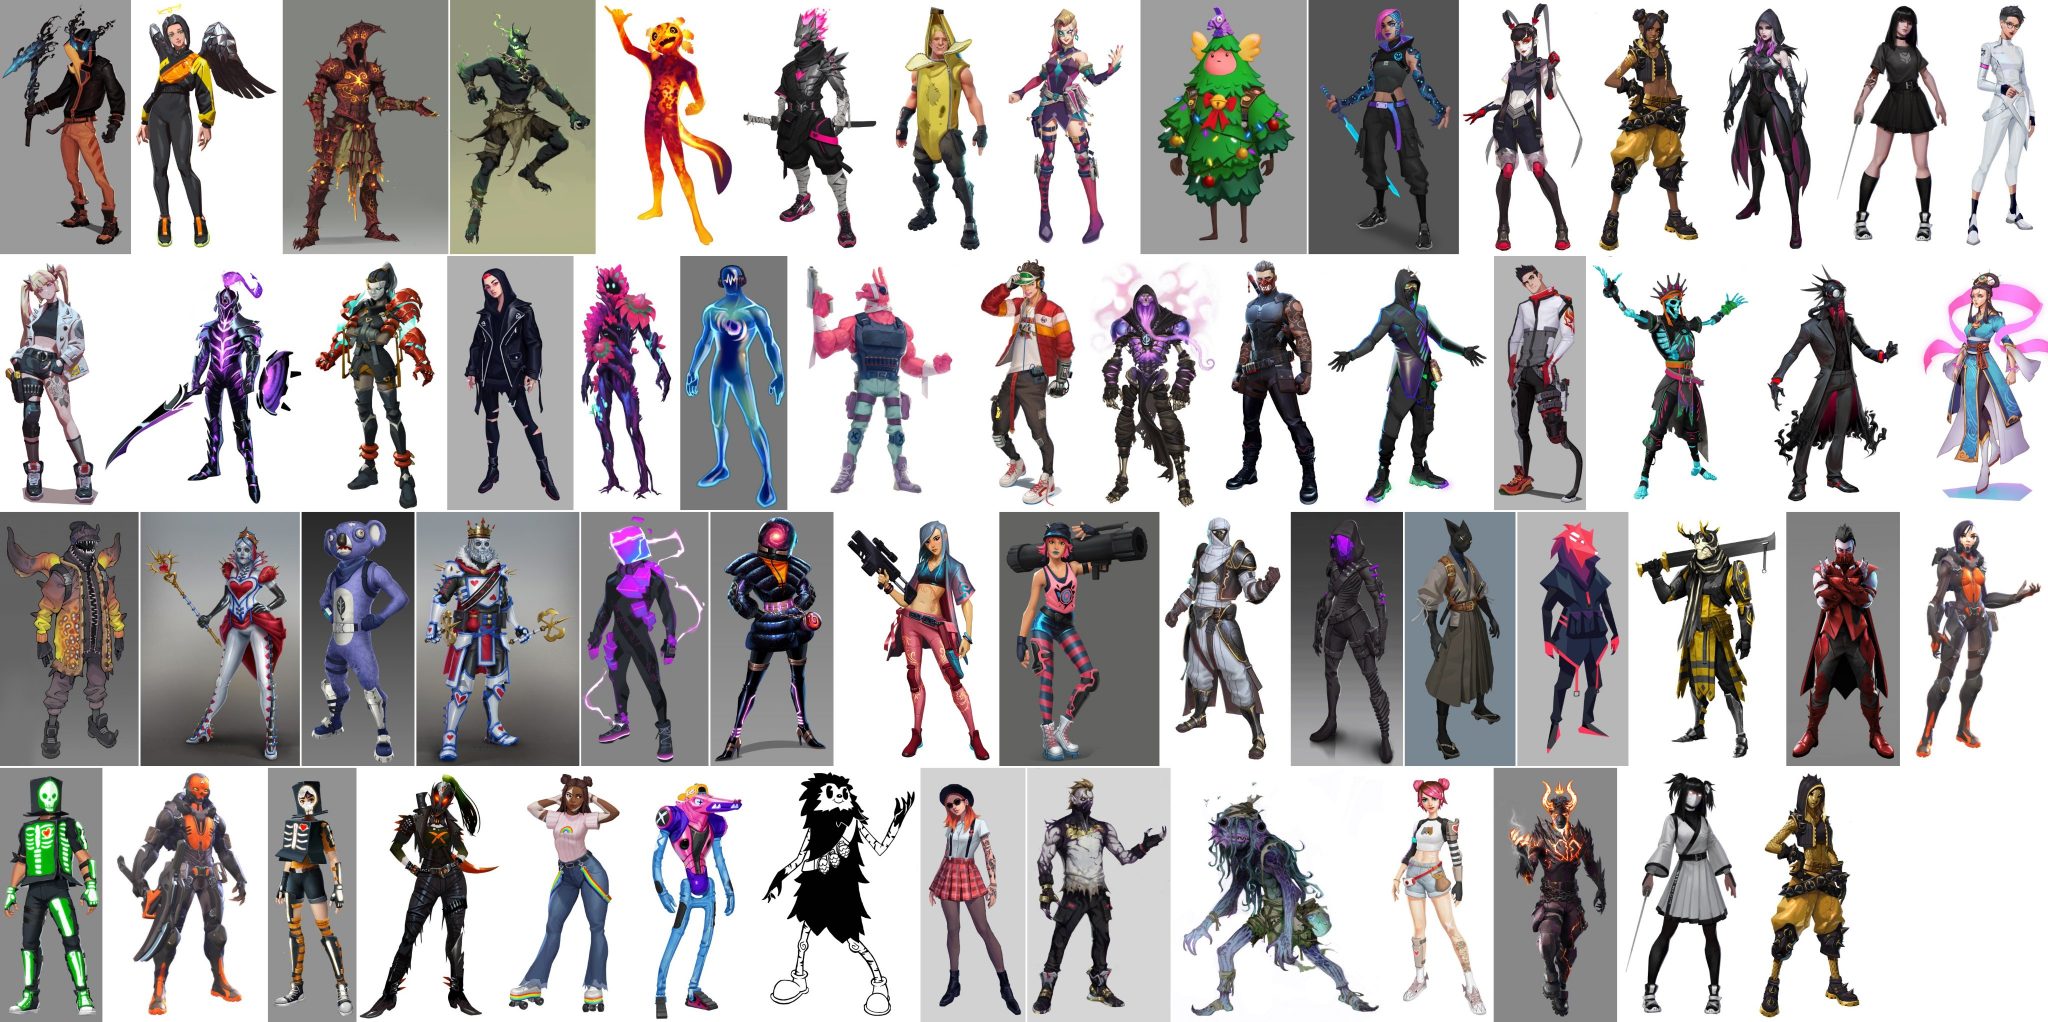 These skin concepts are coming to Fortnite leaks Fortnite Battle Royale